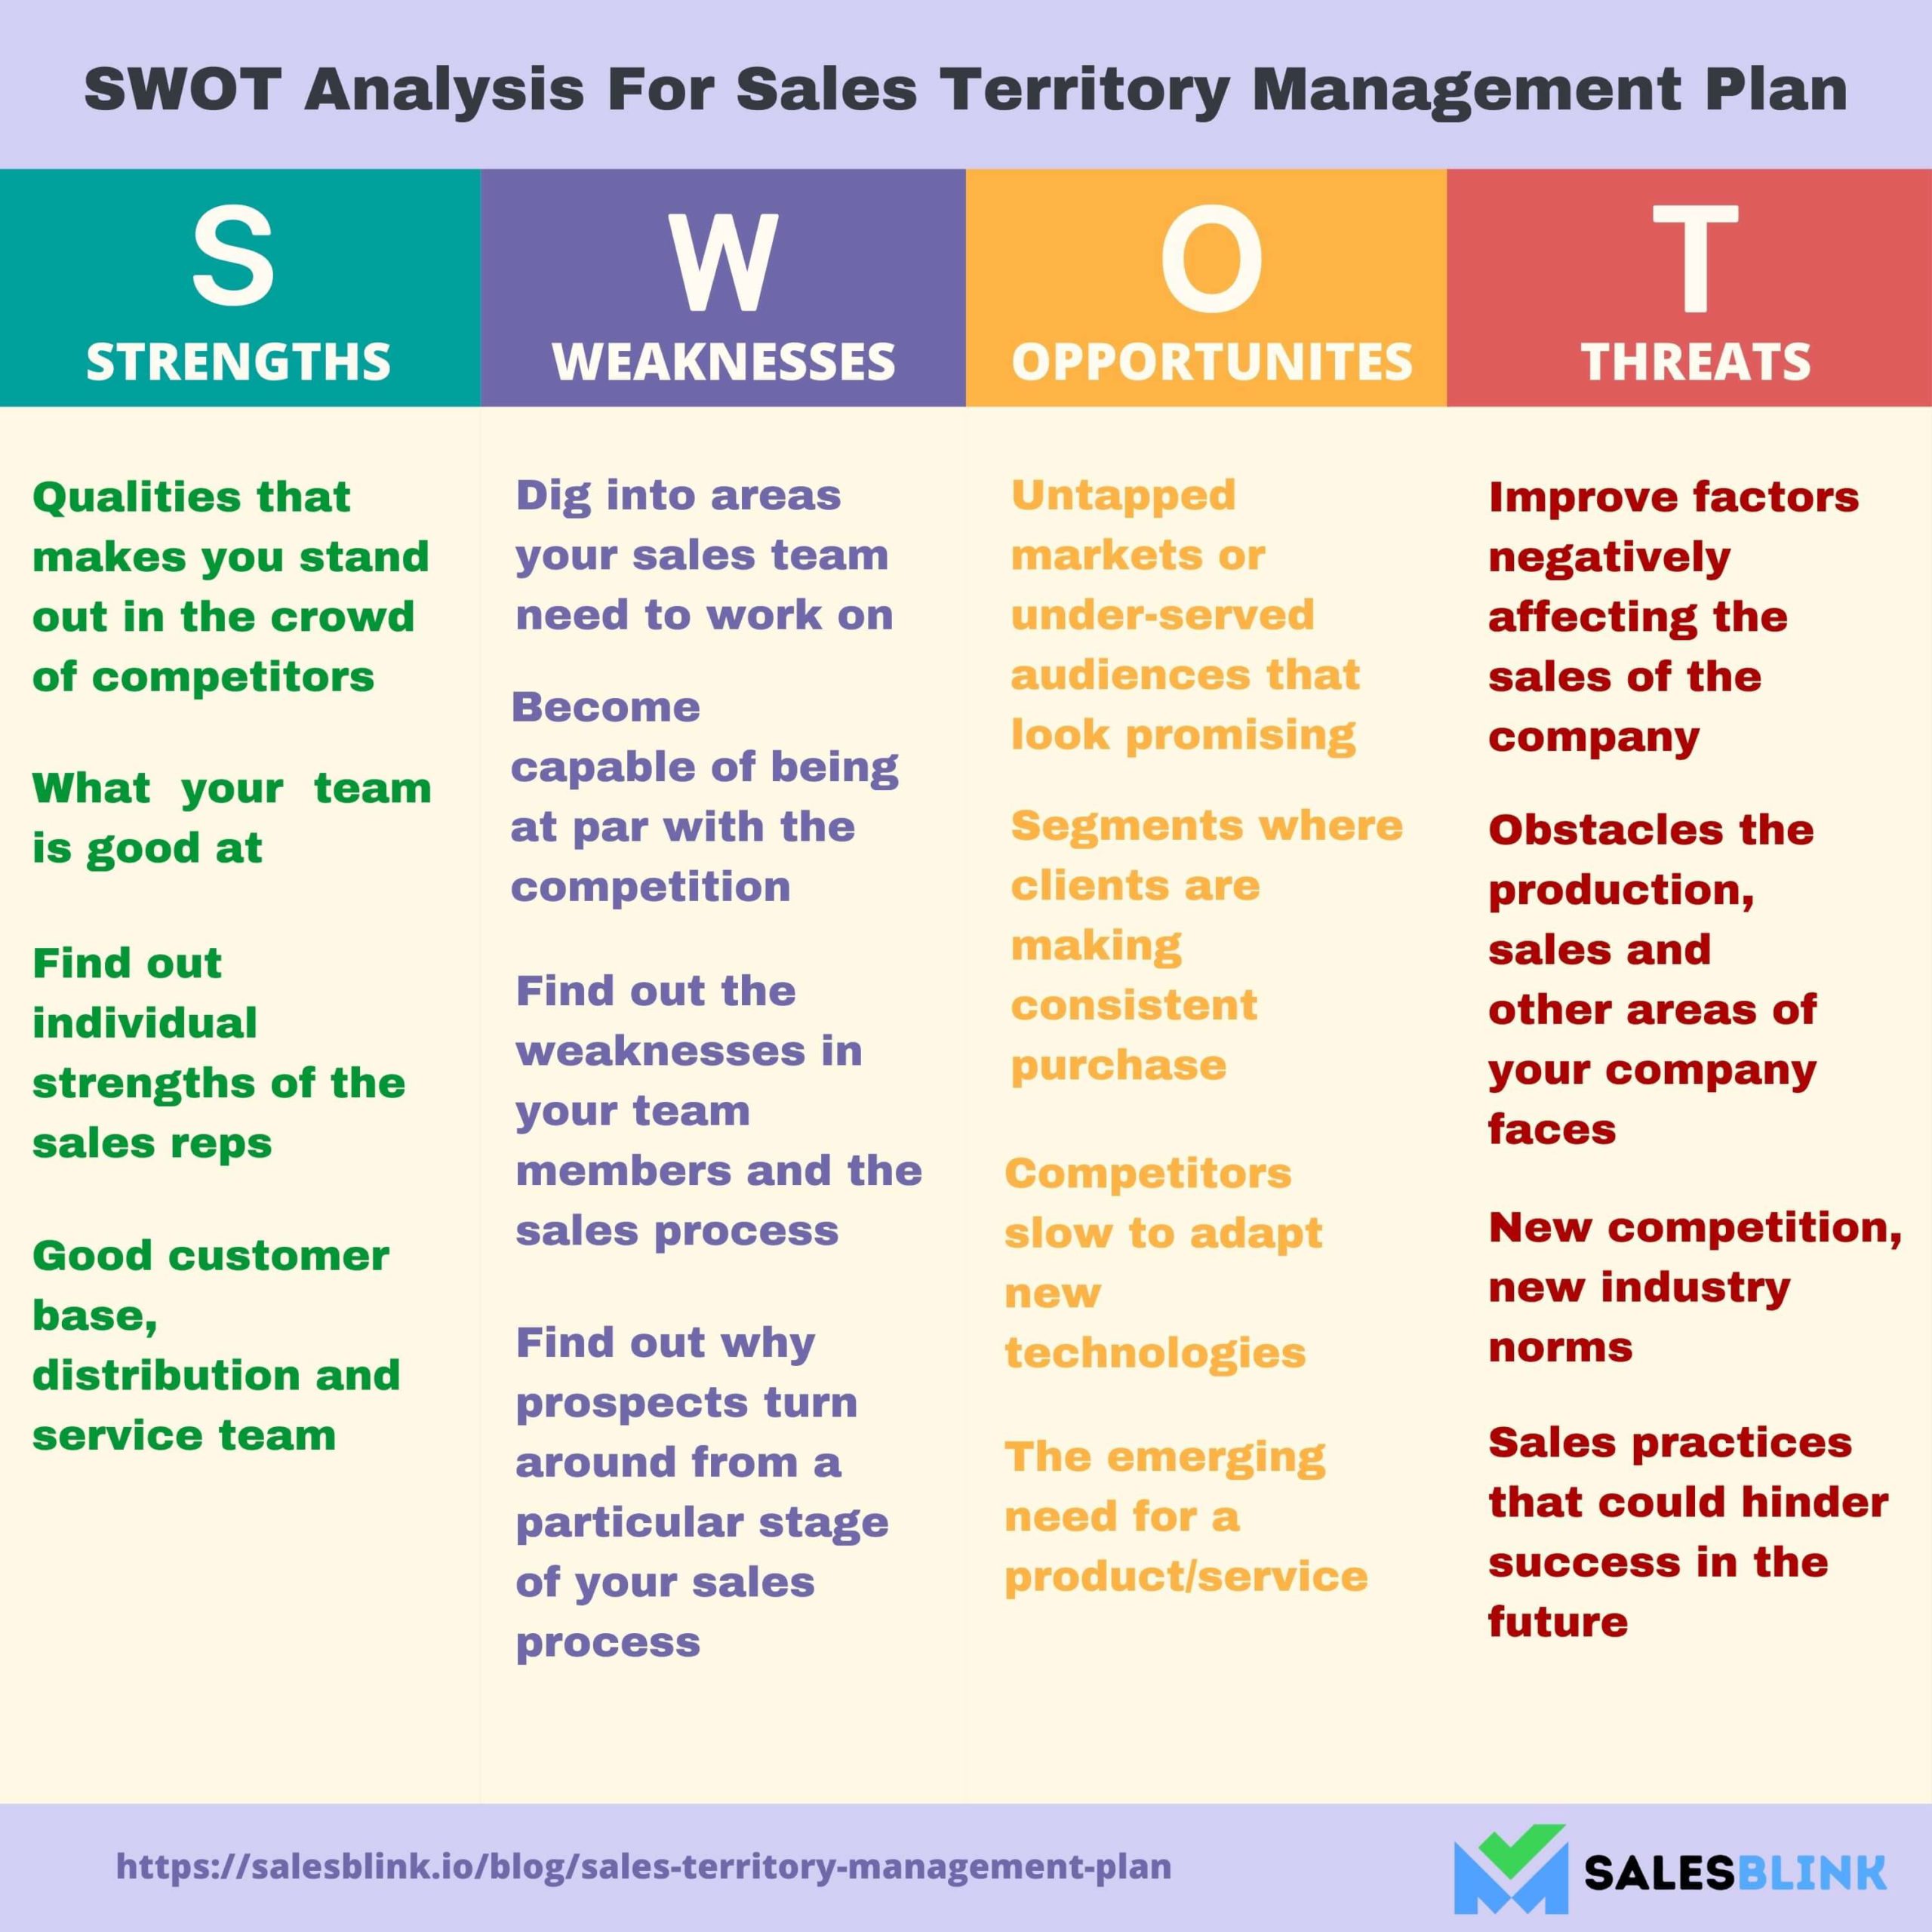 SWOT Analysis for Sales Territory Management Plan